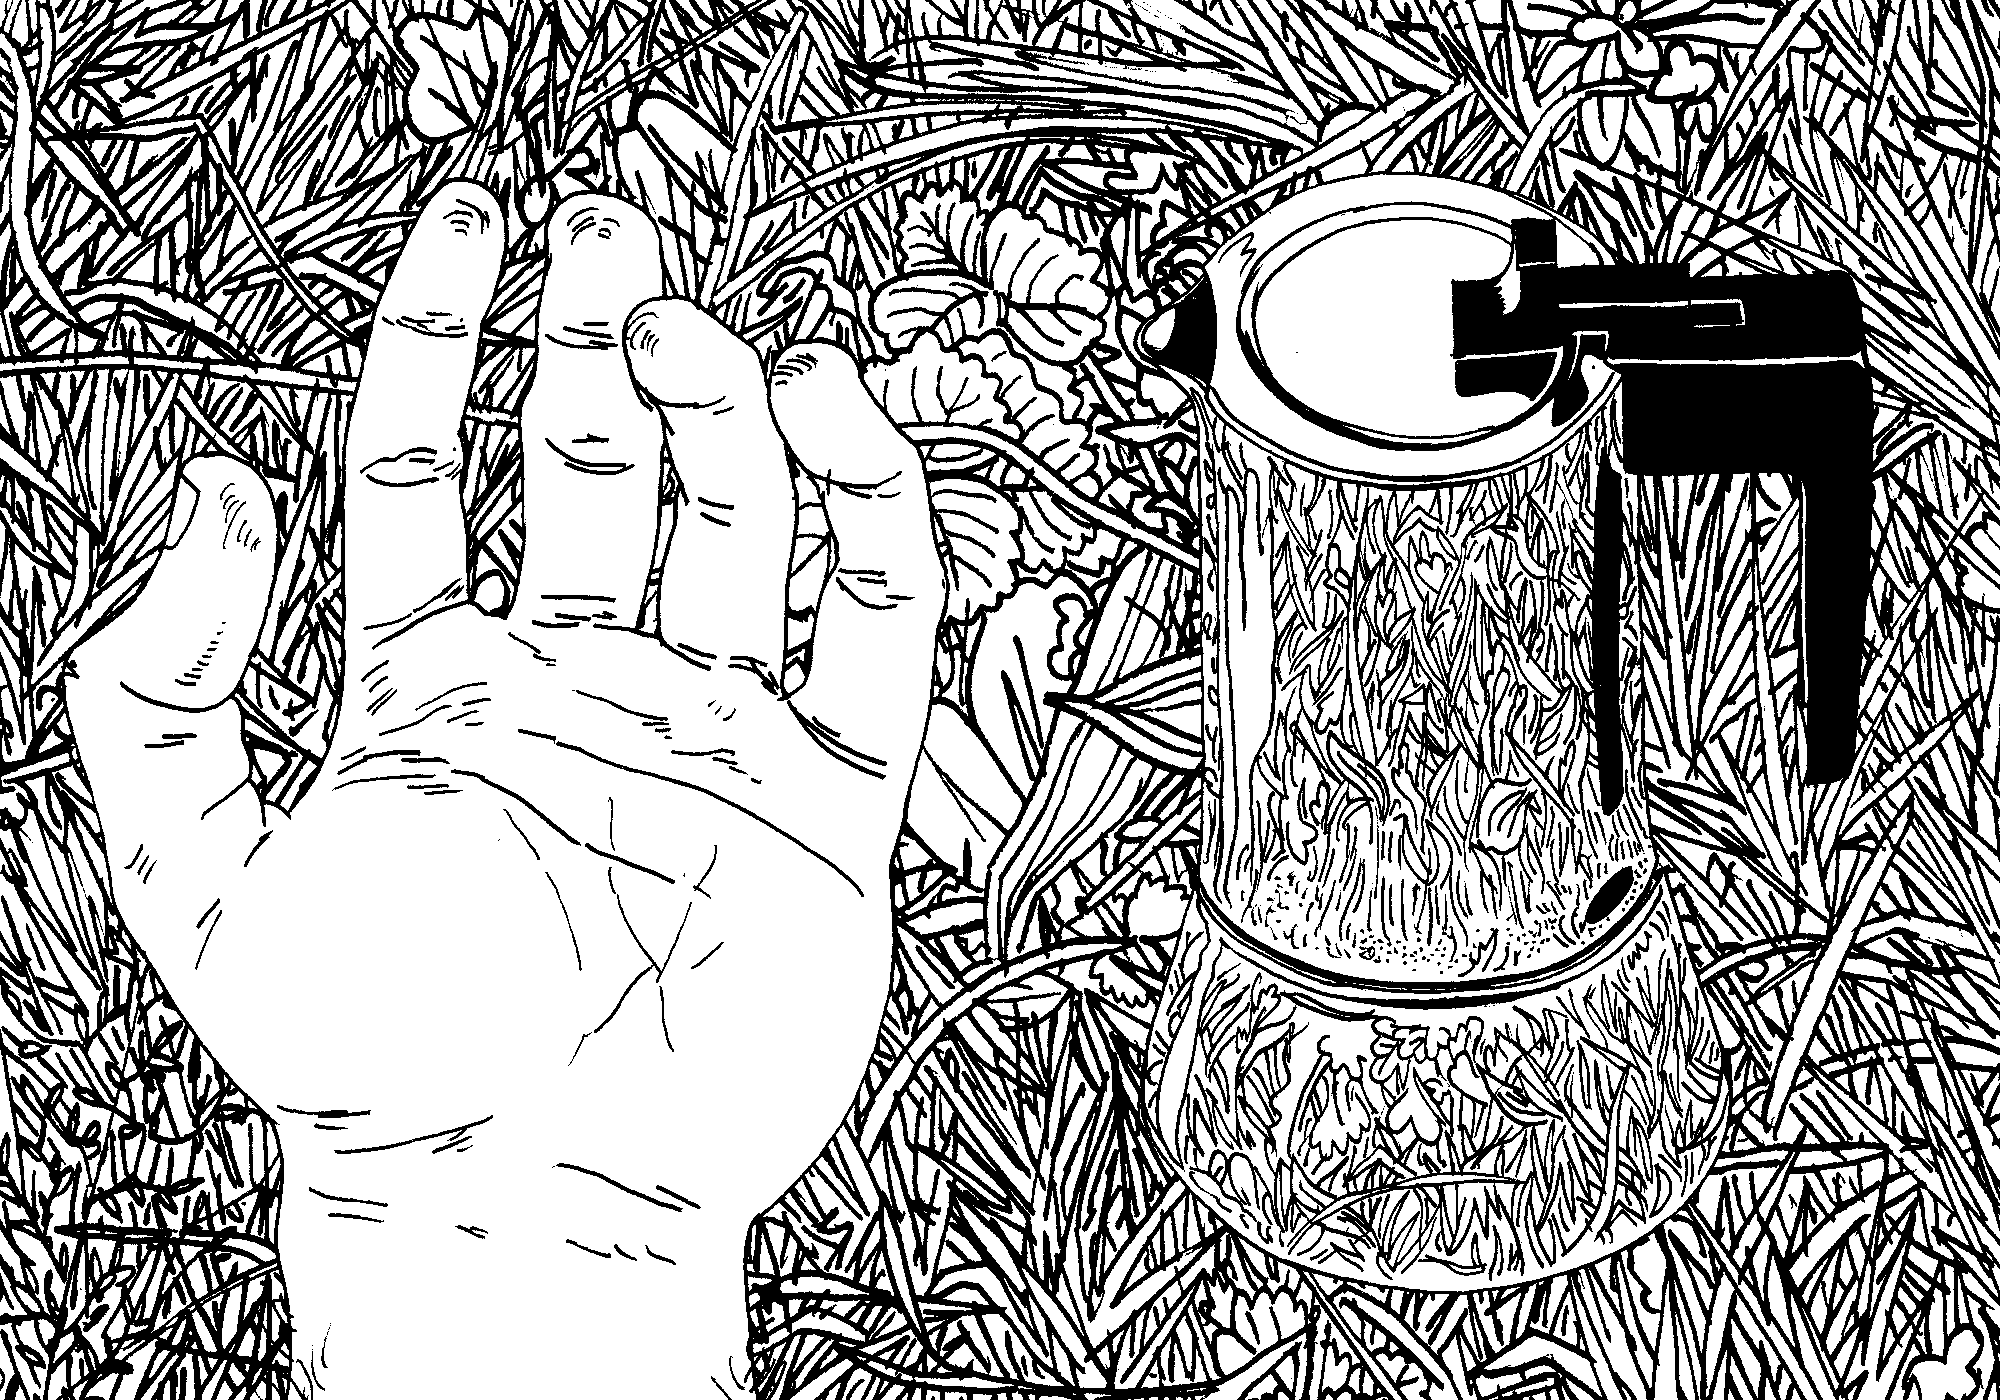 Illustration of a hand and mocha pot – the hand unscrews the top of the mocha pot before becoming fused with it